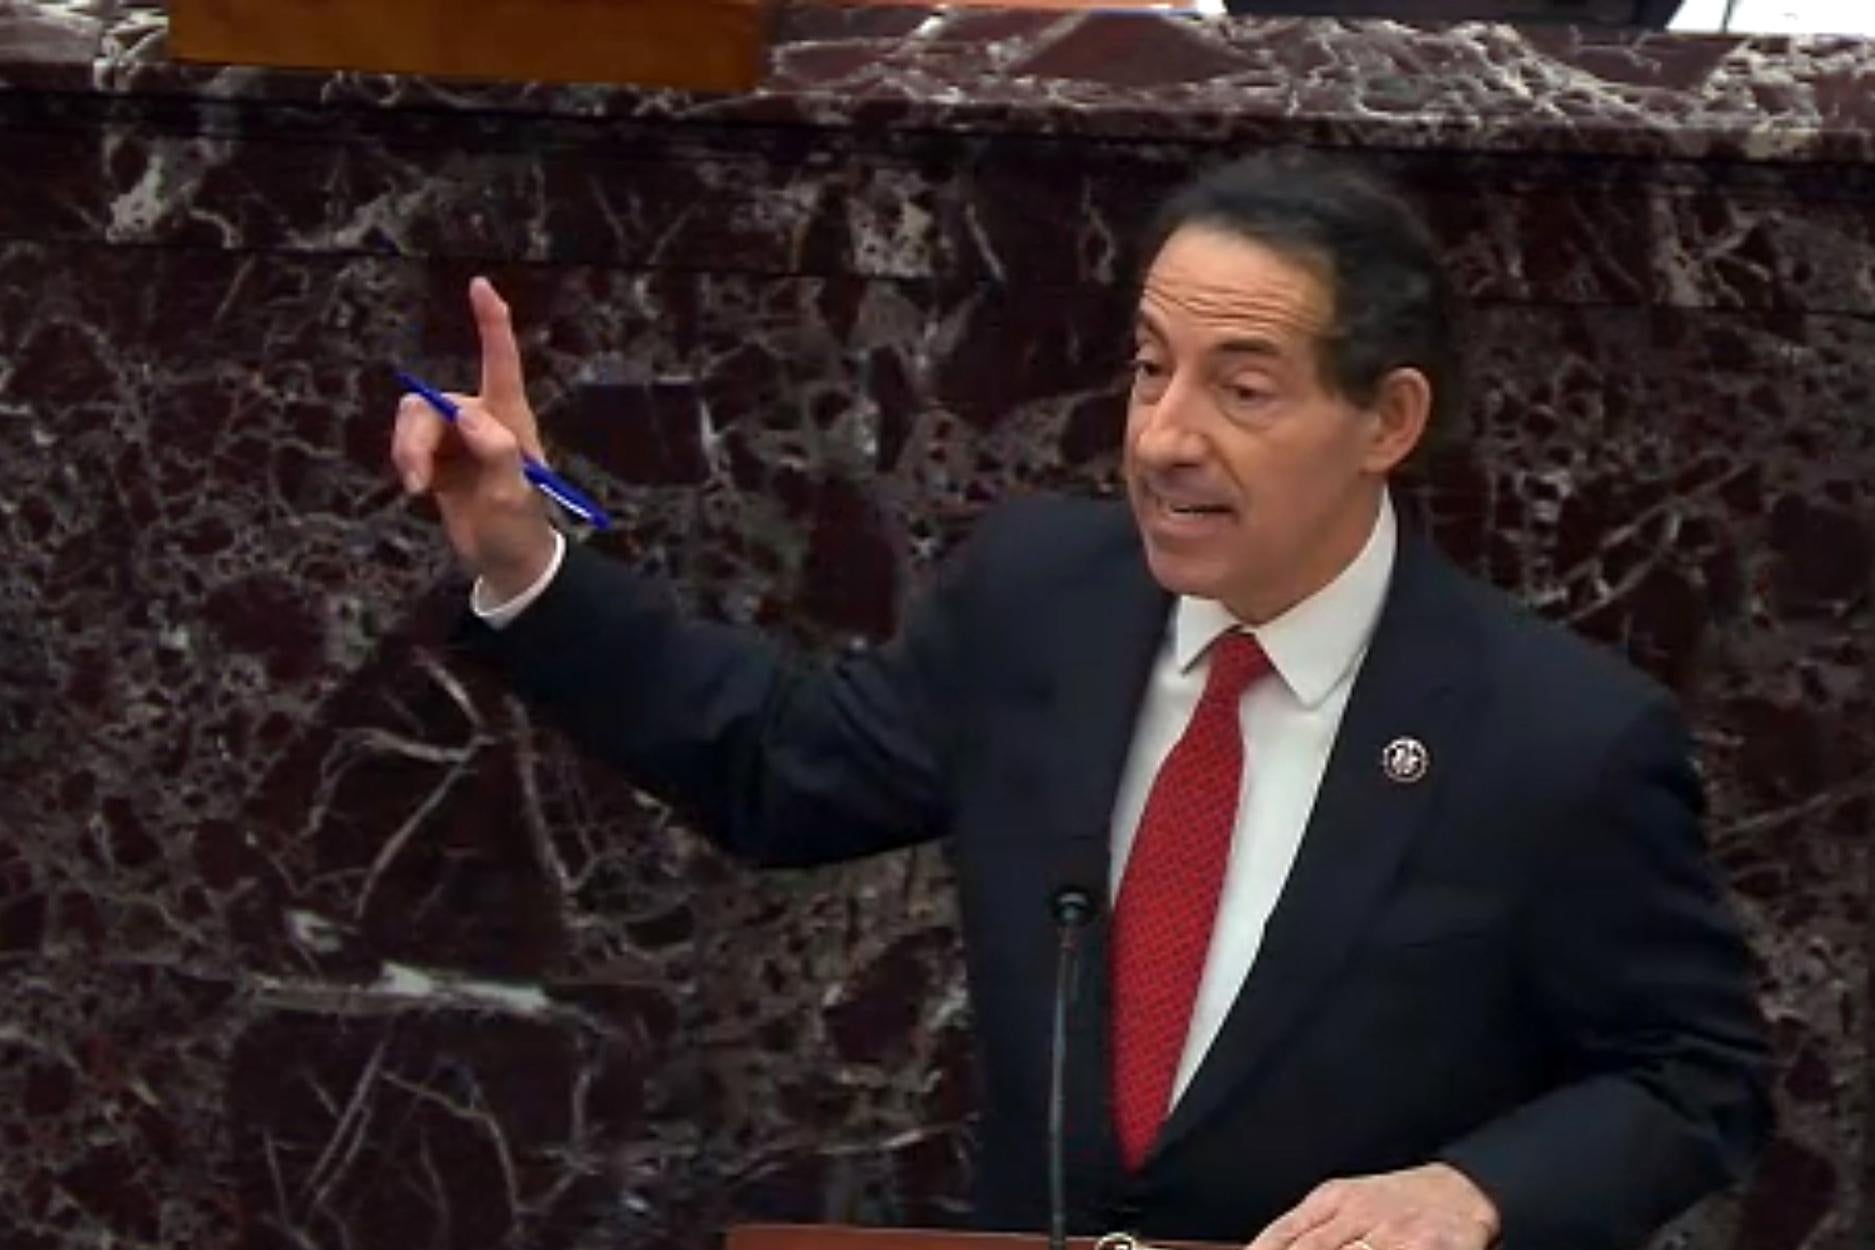 Raskin holds out his finger as he speaks at a mic